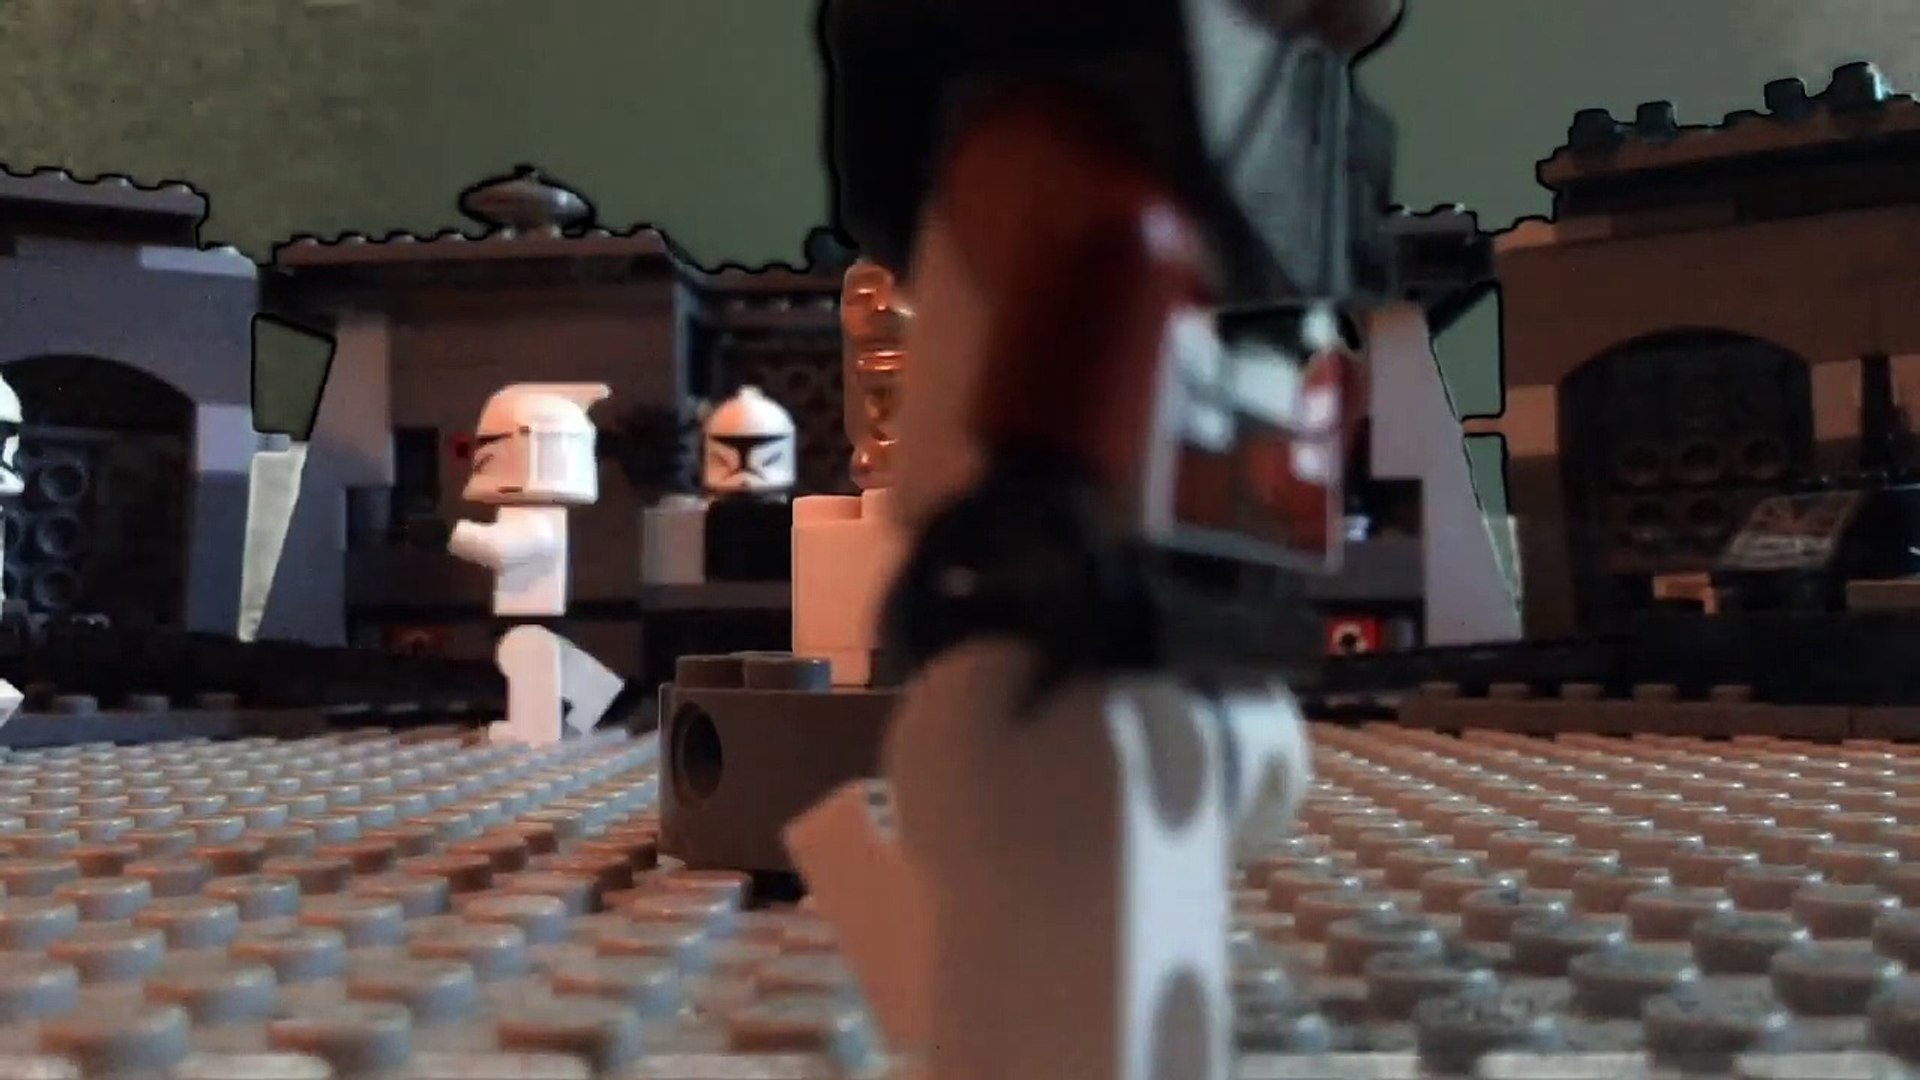 lego clone wars stop motion